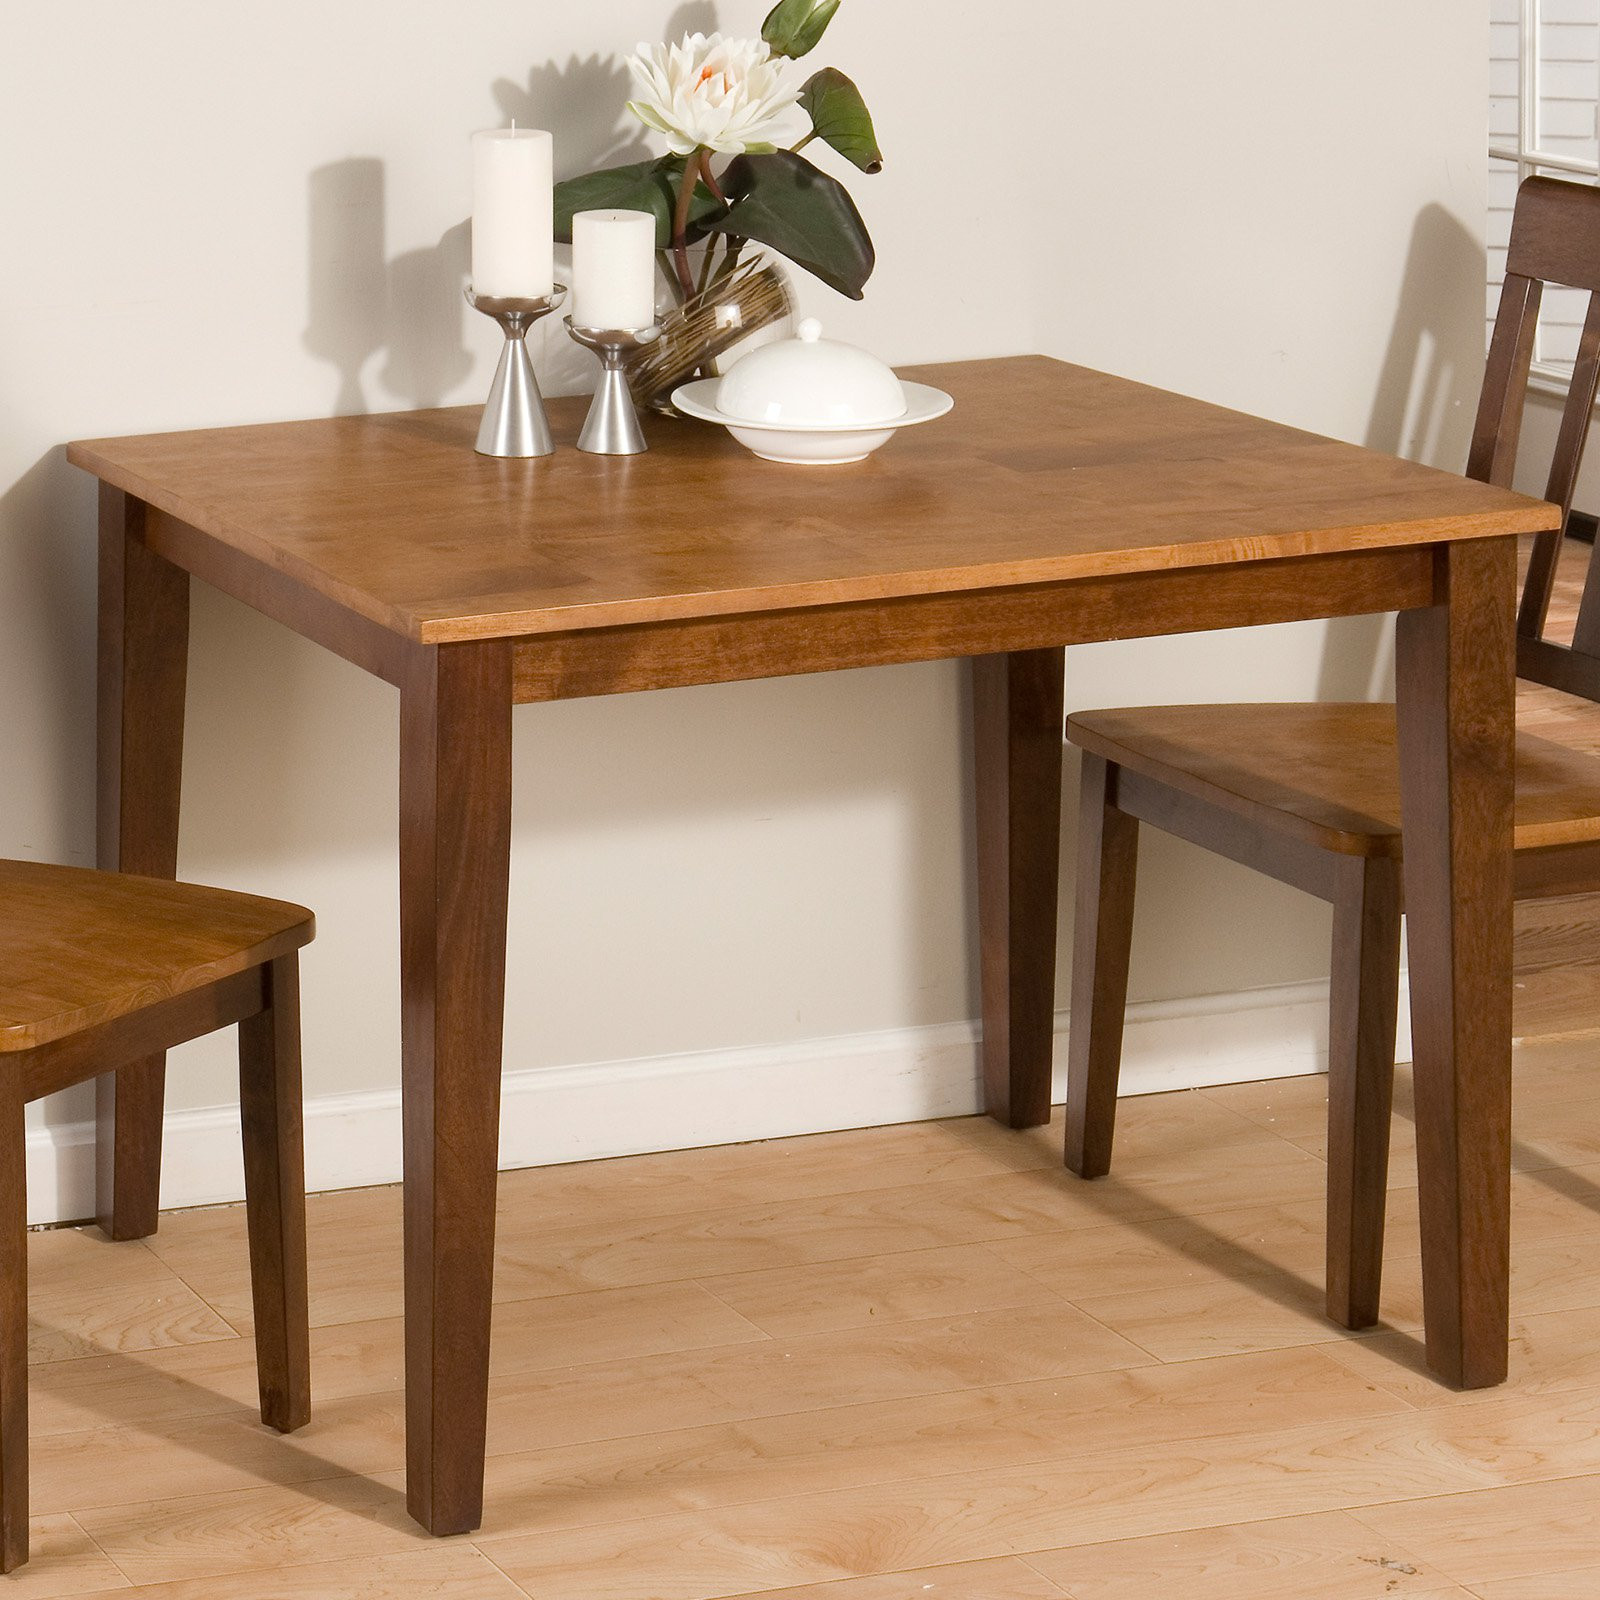 Small Space Kitchen Table Sets
 Small Rectangular Kitchen Table – HomesFeed